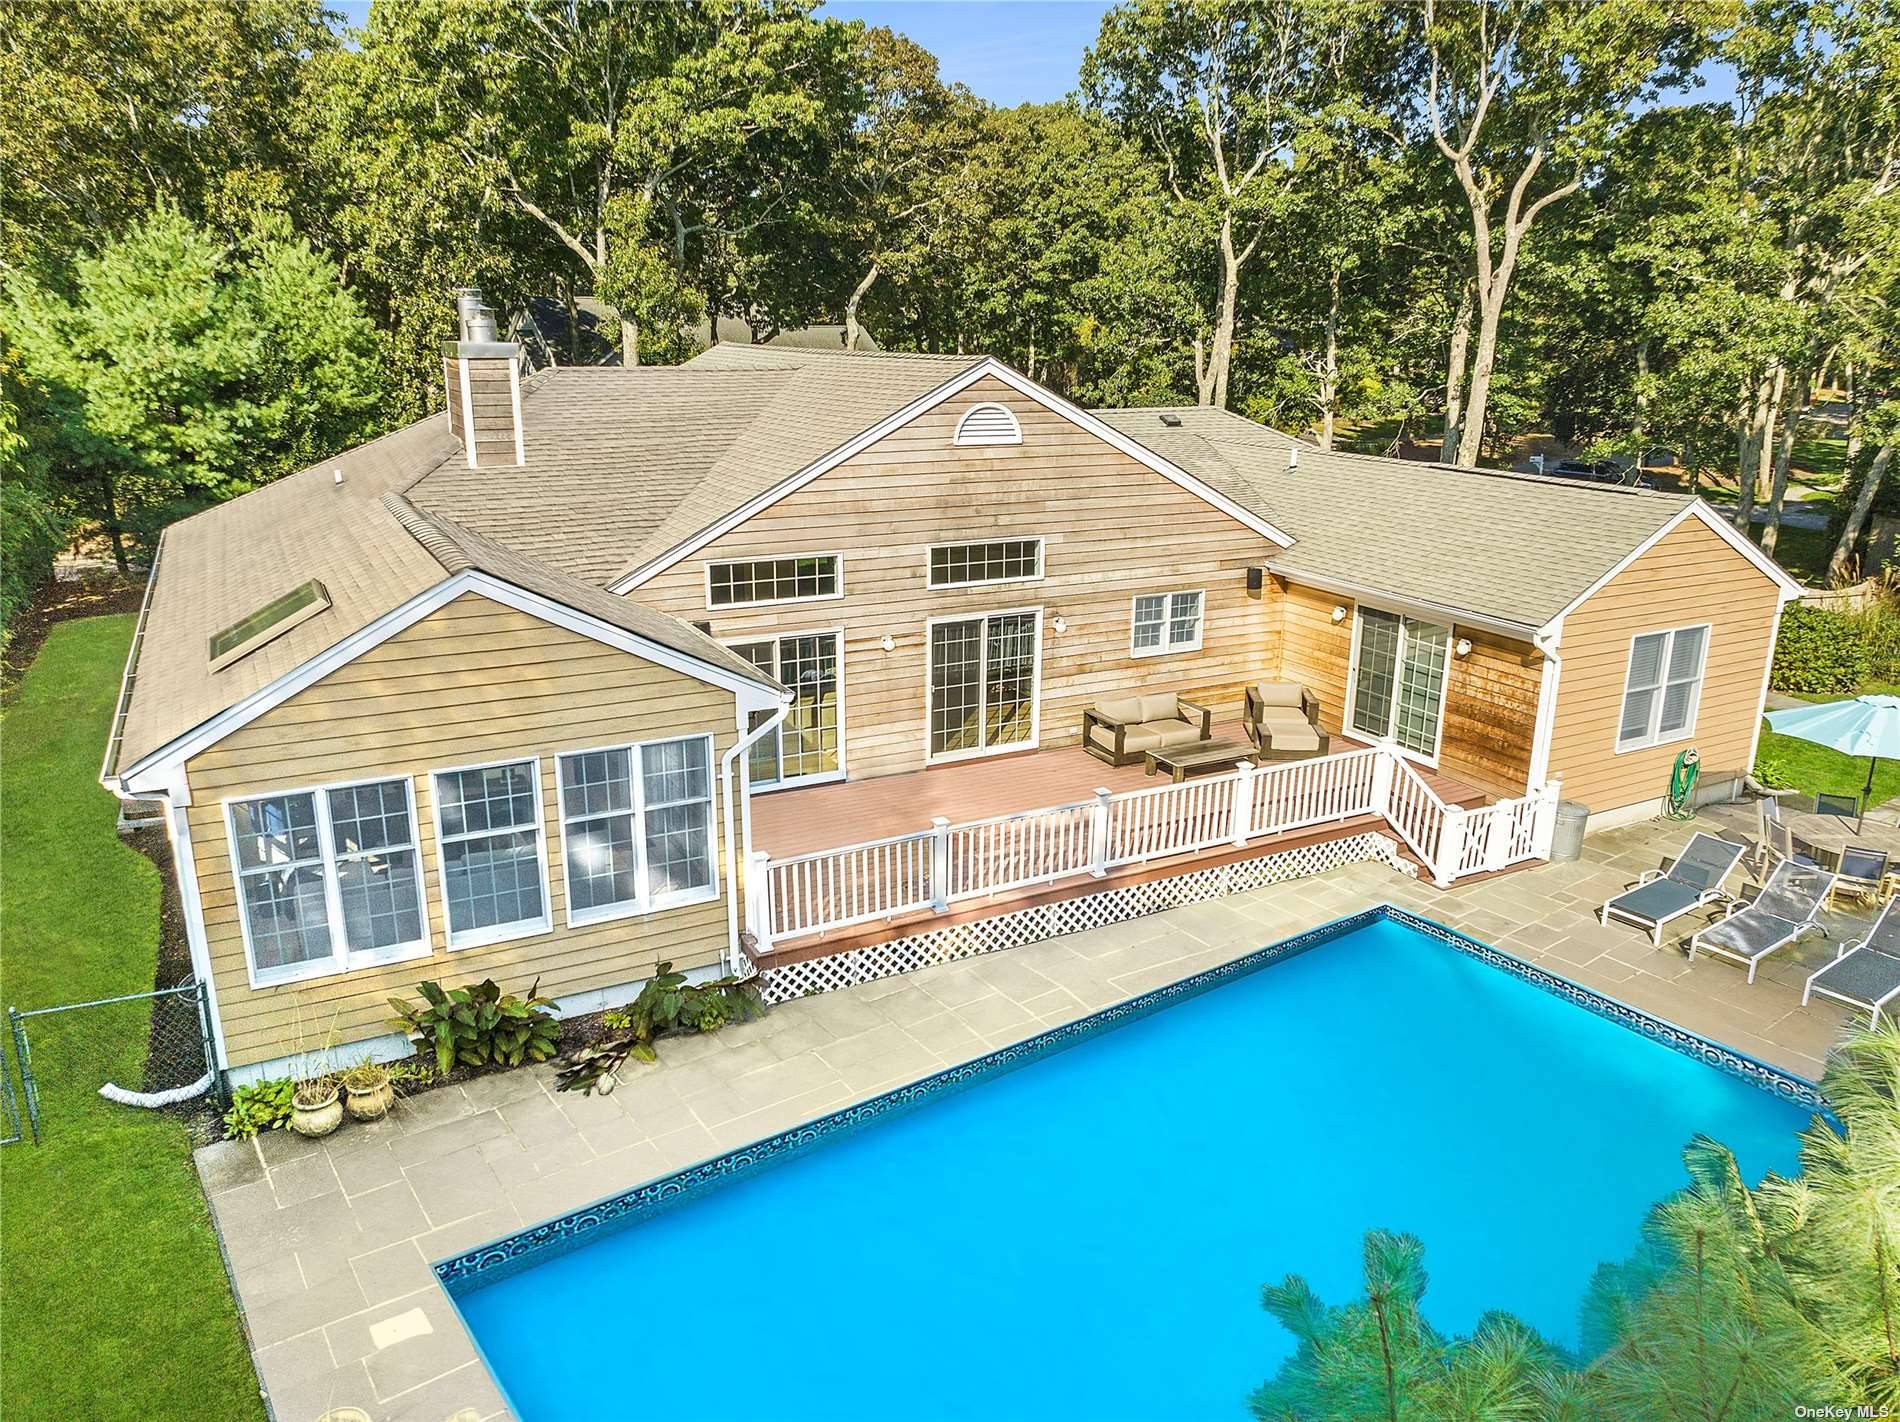 Nestled in a serene enclave in Westhampton Beach Village, this delightful one level home offers the perfect blend of comfort, style, and natural beauty.